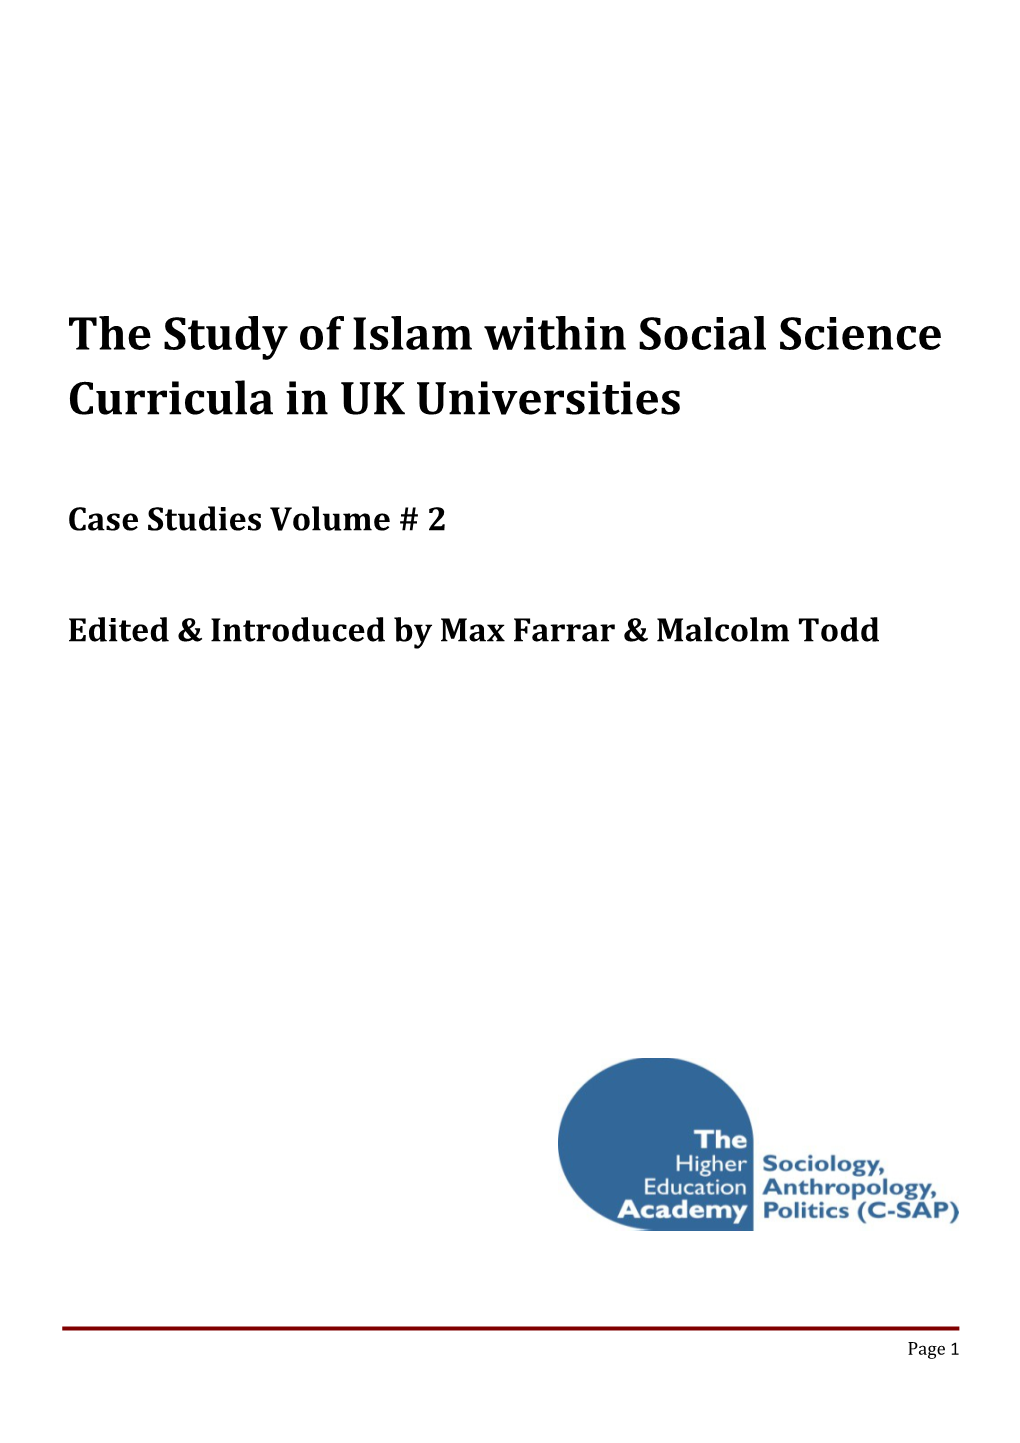 The Study of Islam Within Social Science Curricula in UK Universities